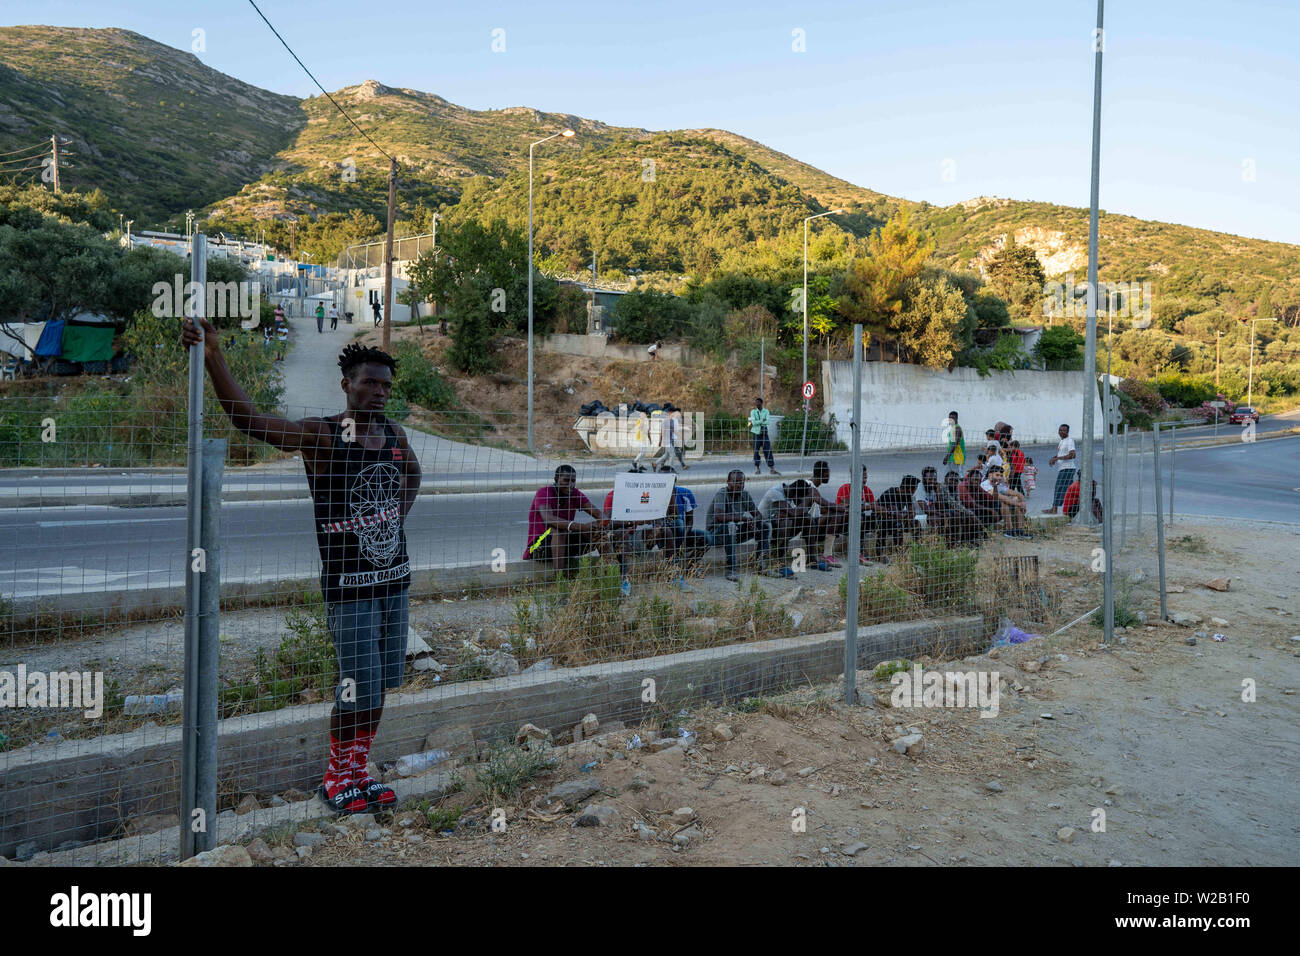 Samos, Samos, Greece. 28th June, 2019. A group of migrants living in or around the migrant camp on Samos gather to watch a game of football between players from Cameroon and the Democratic Republic of Congo. Samos Island is one of Europe's migrant hotspots acting as a reception and identification centre (RIC). It was established as a temporary accommodation site where migrants could be processed before moving to a refugee camp on the mainland. However, due to the continued number of arrivals, the mainland camps are full and so migrants are being left at the islands. The conditions are inhu Stock Photo